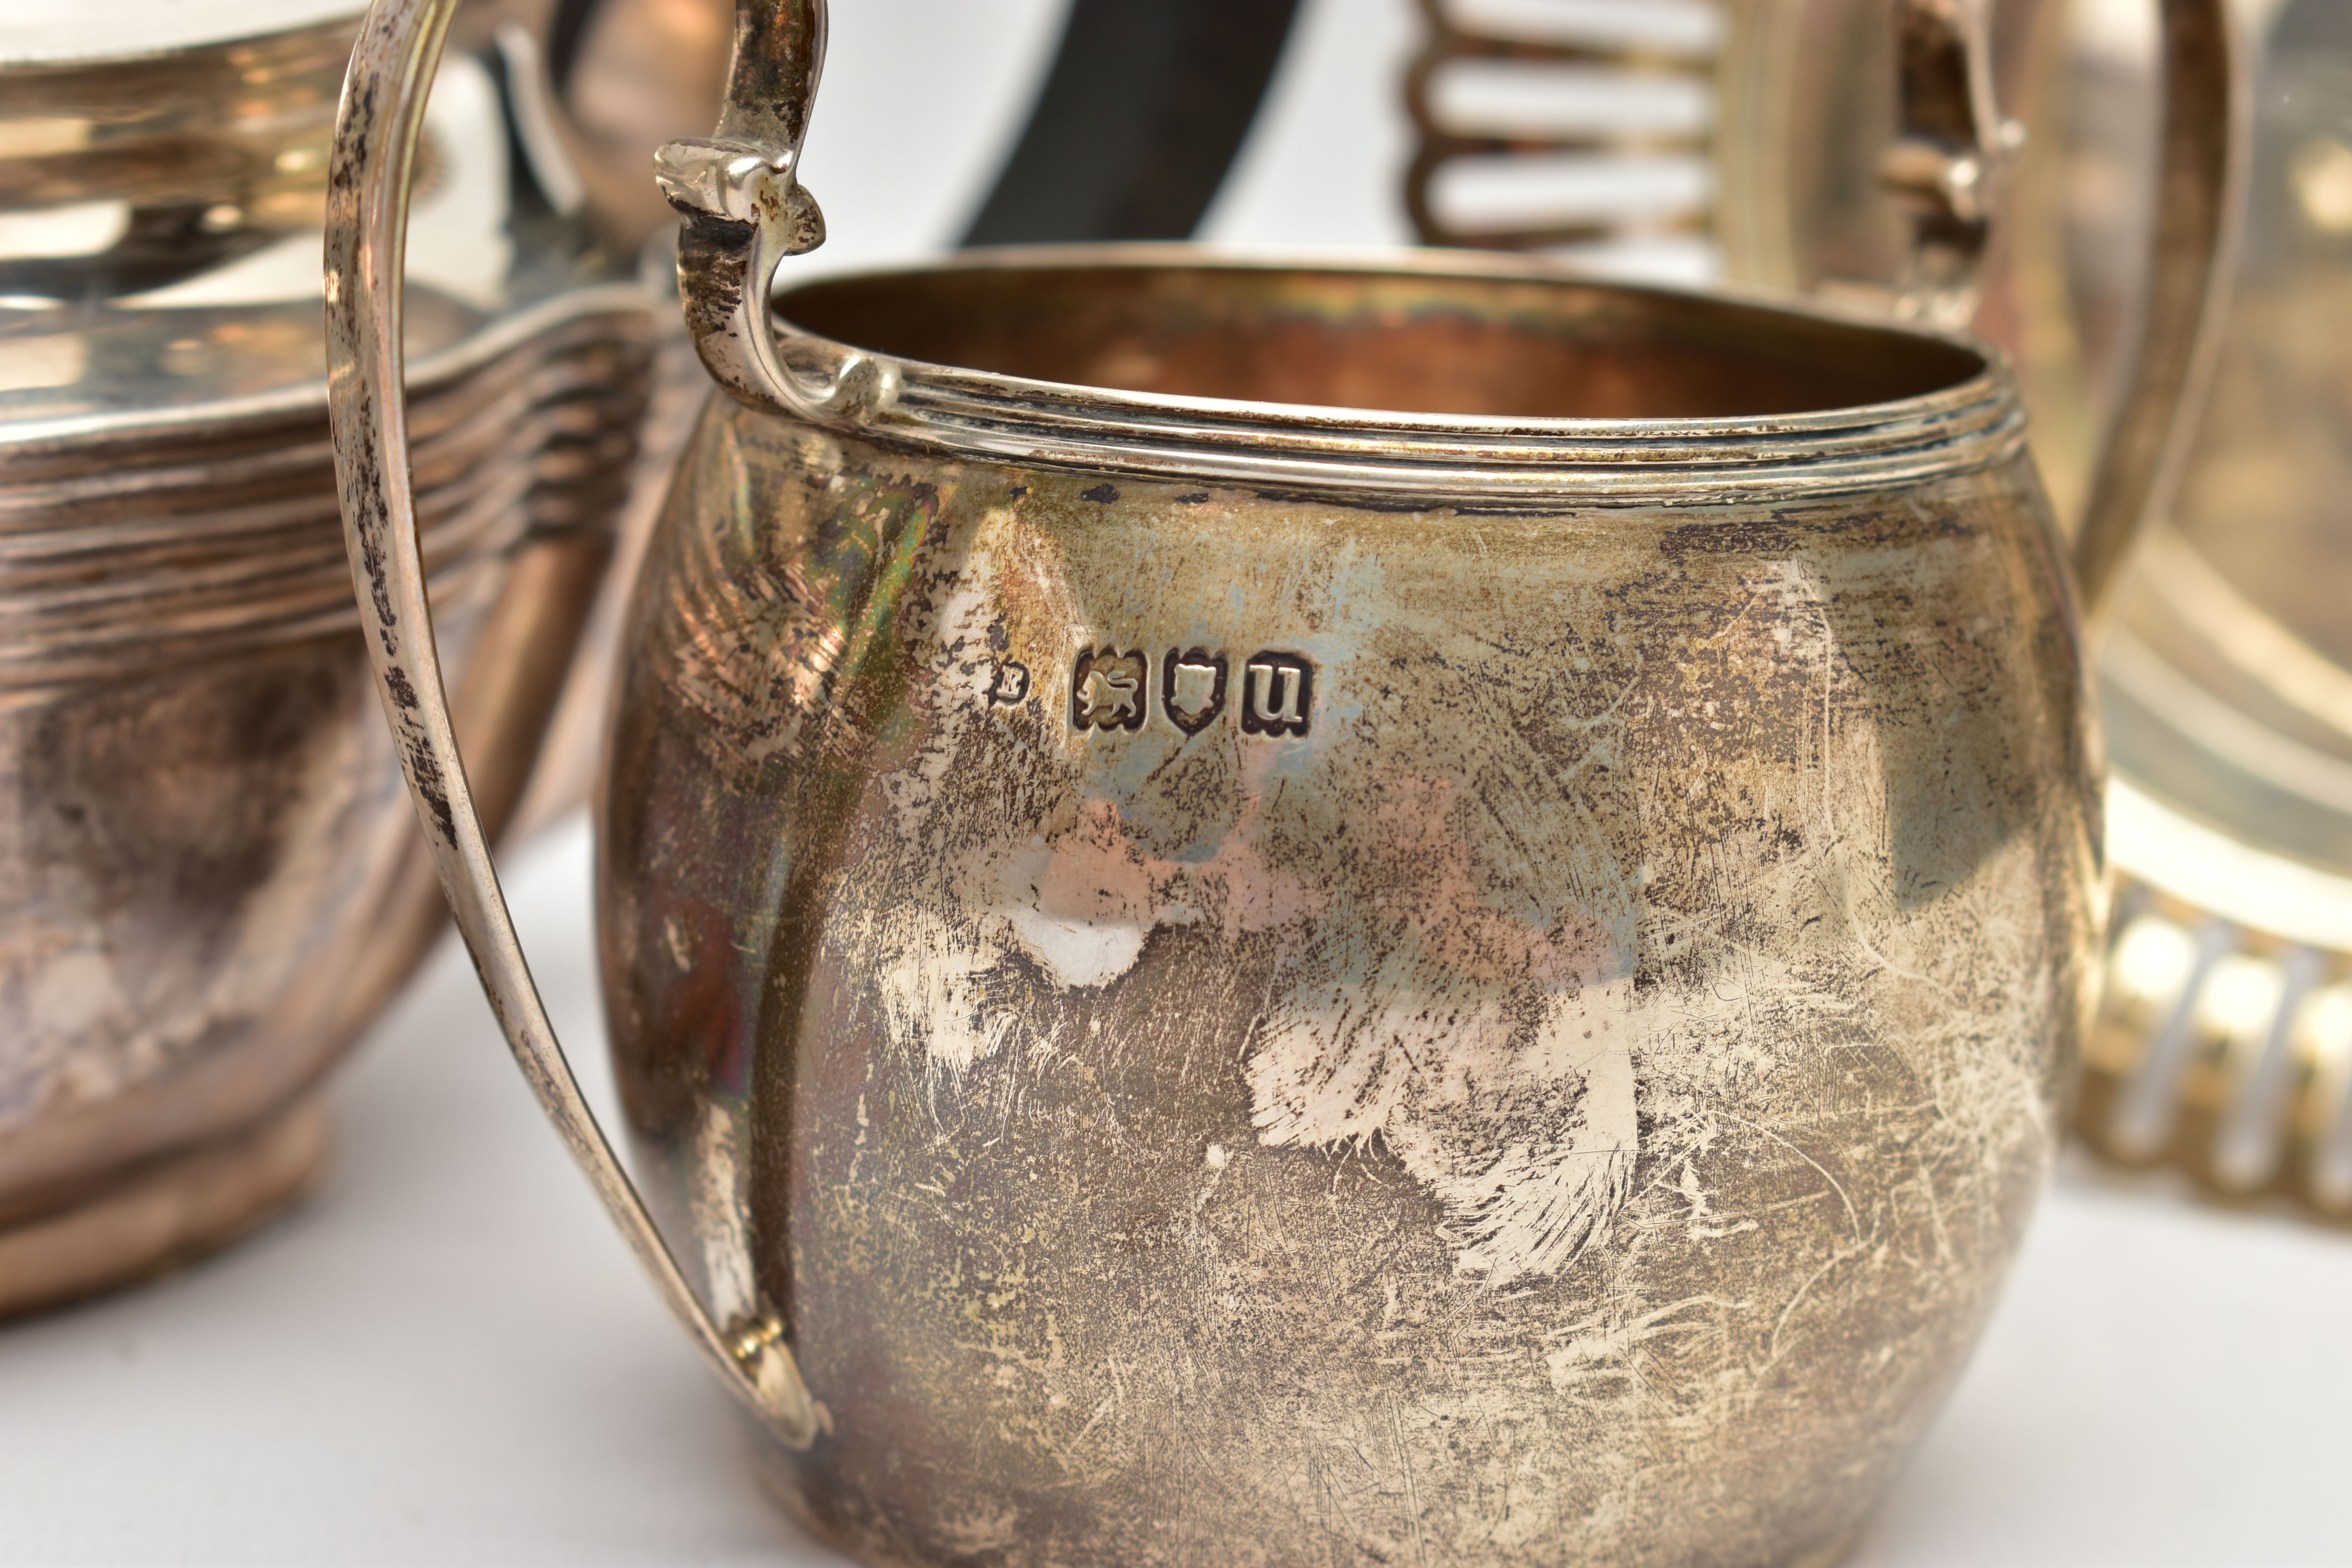 AN EDWARDIAN SILVER BACHELOR'S TEA POT OF SHAPED OVAL FORM, A TWIN HANDLED SILVER SUGAR BOWL AND A - Image 2 of 9